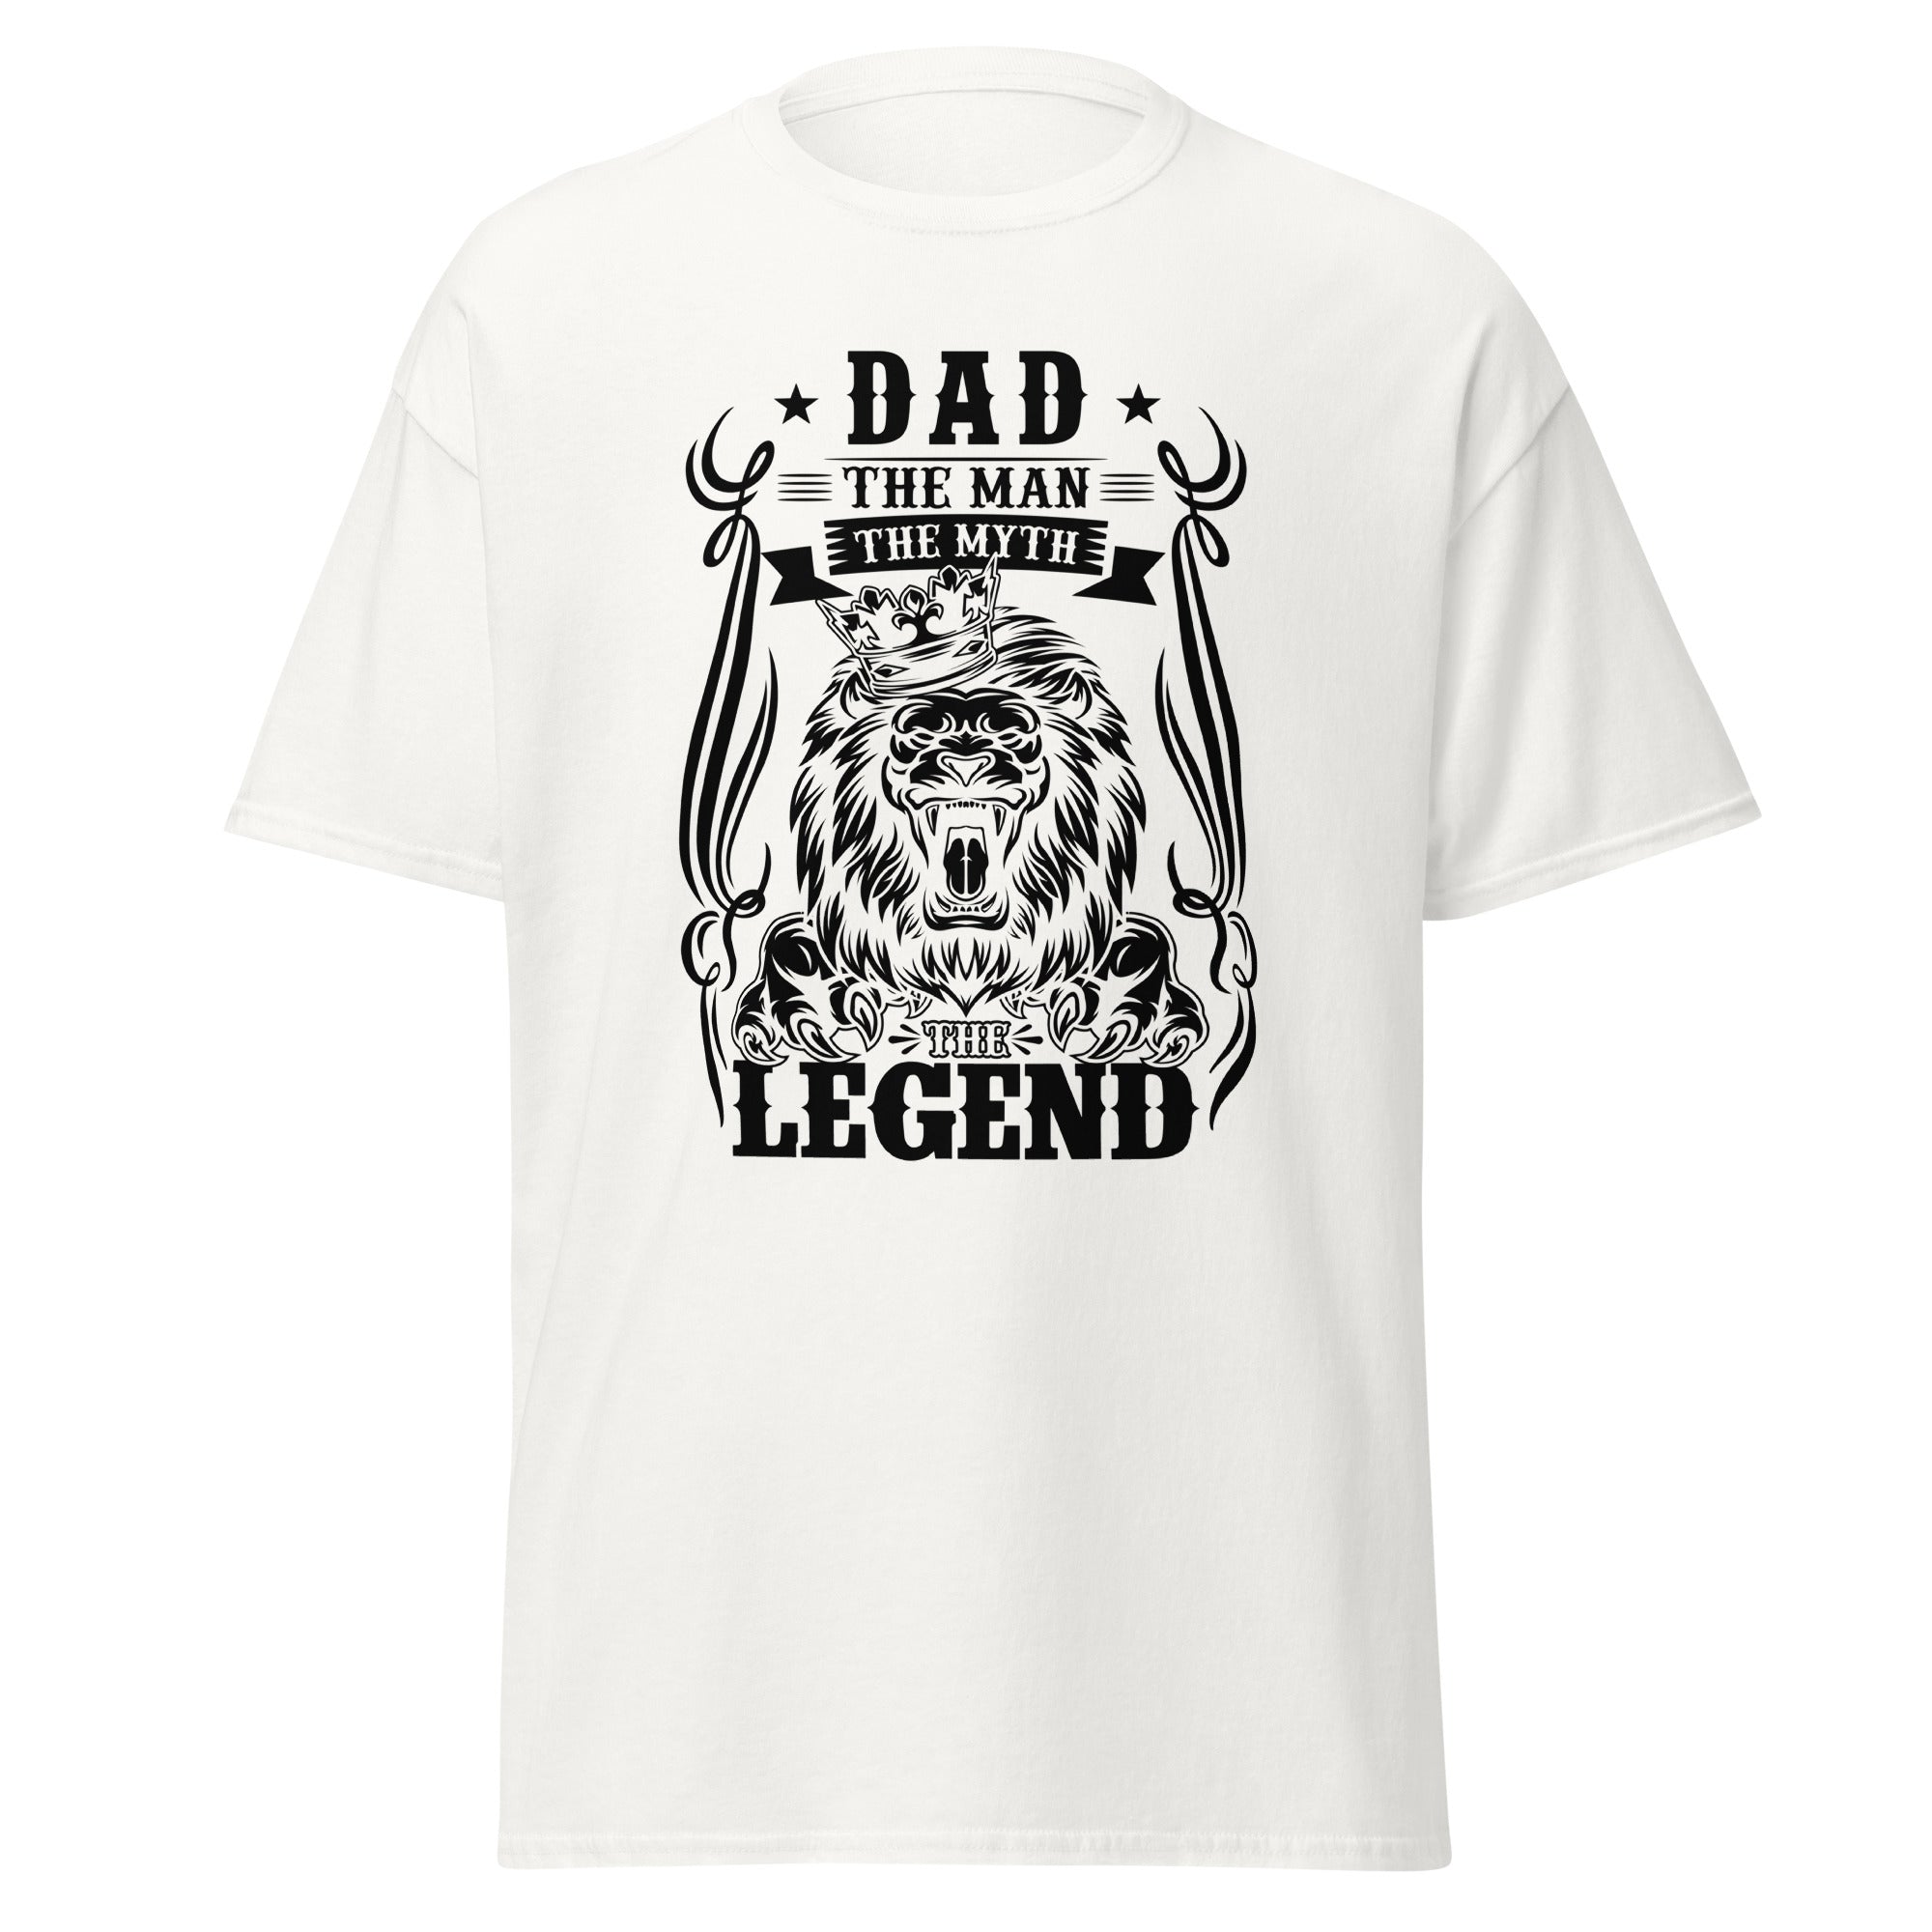 Dad The Man The Myth The Legend Classic Tee